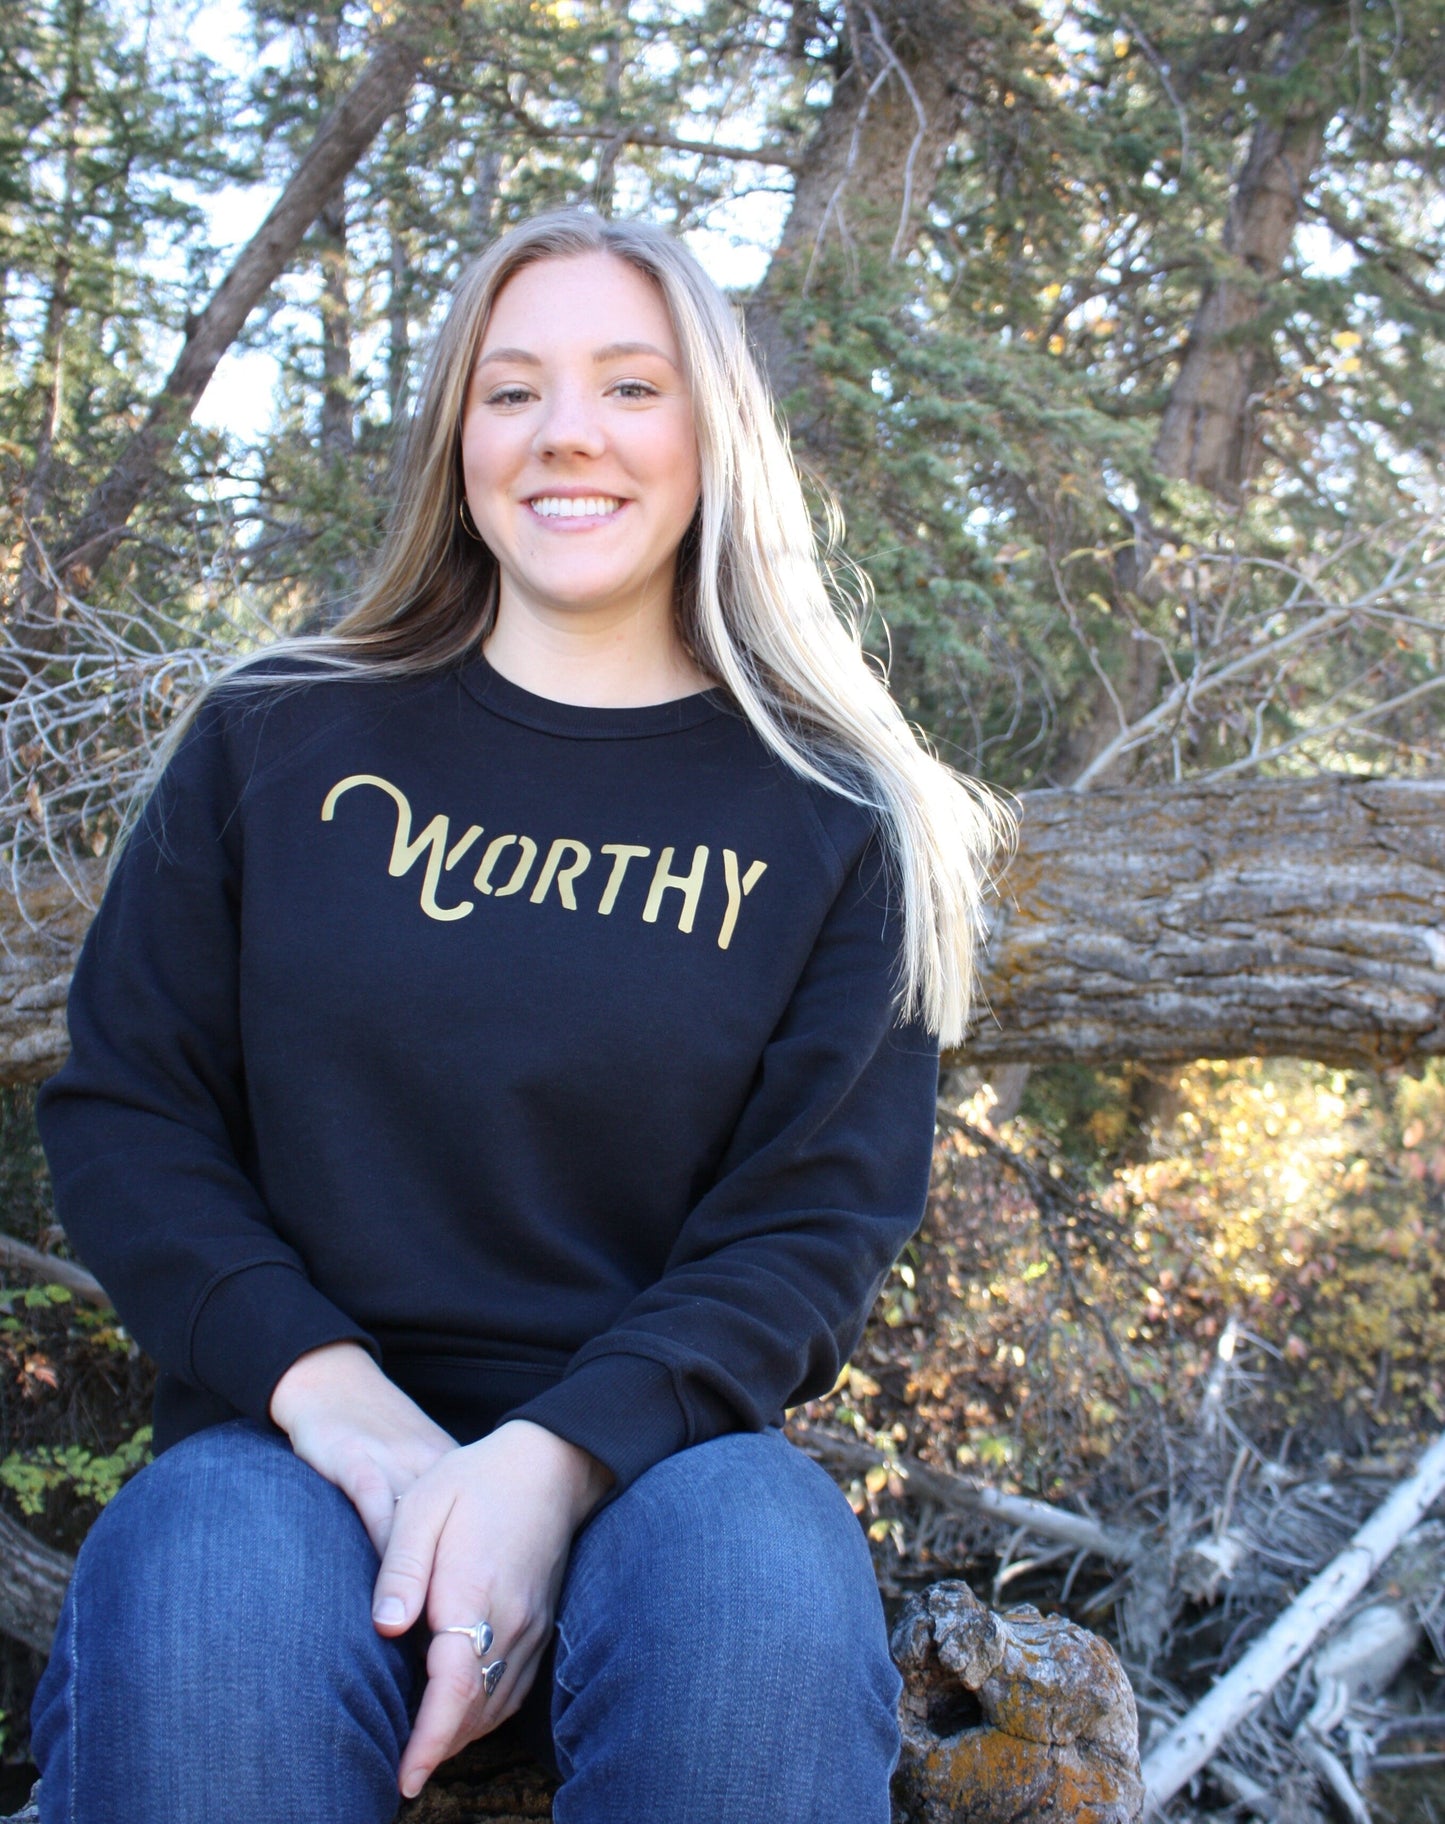 Woman sitting outside, wearing a fitted black pullover sweater with "WORTHY" printed across the front in gold lettering.